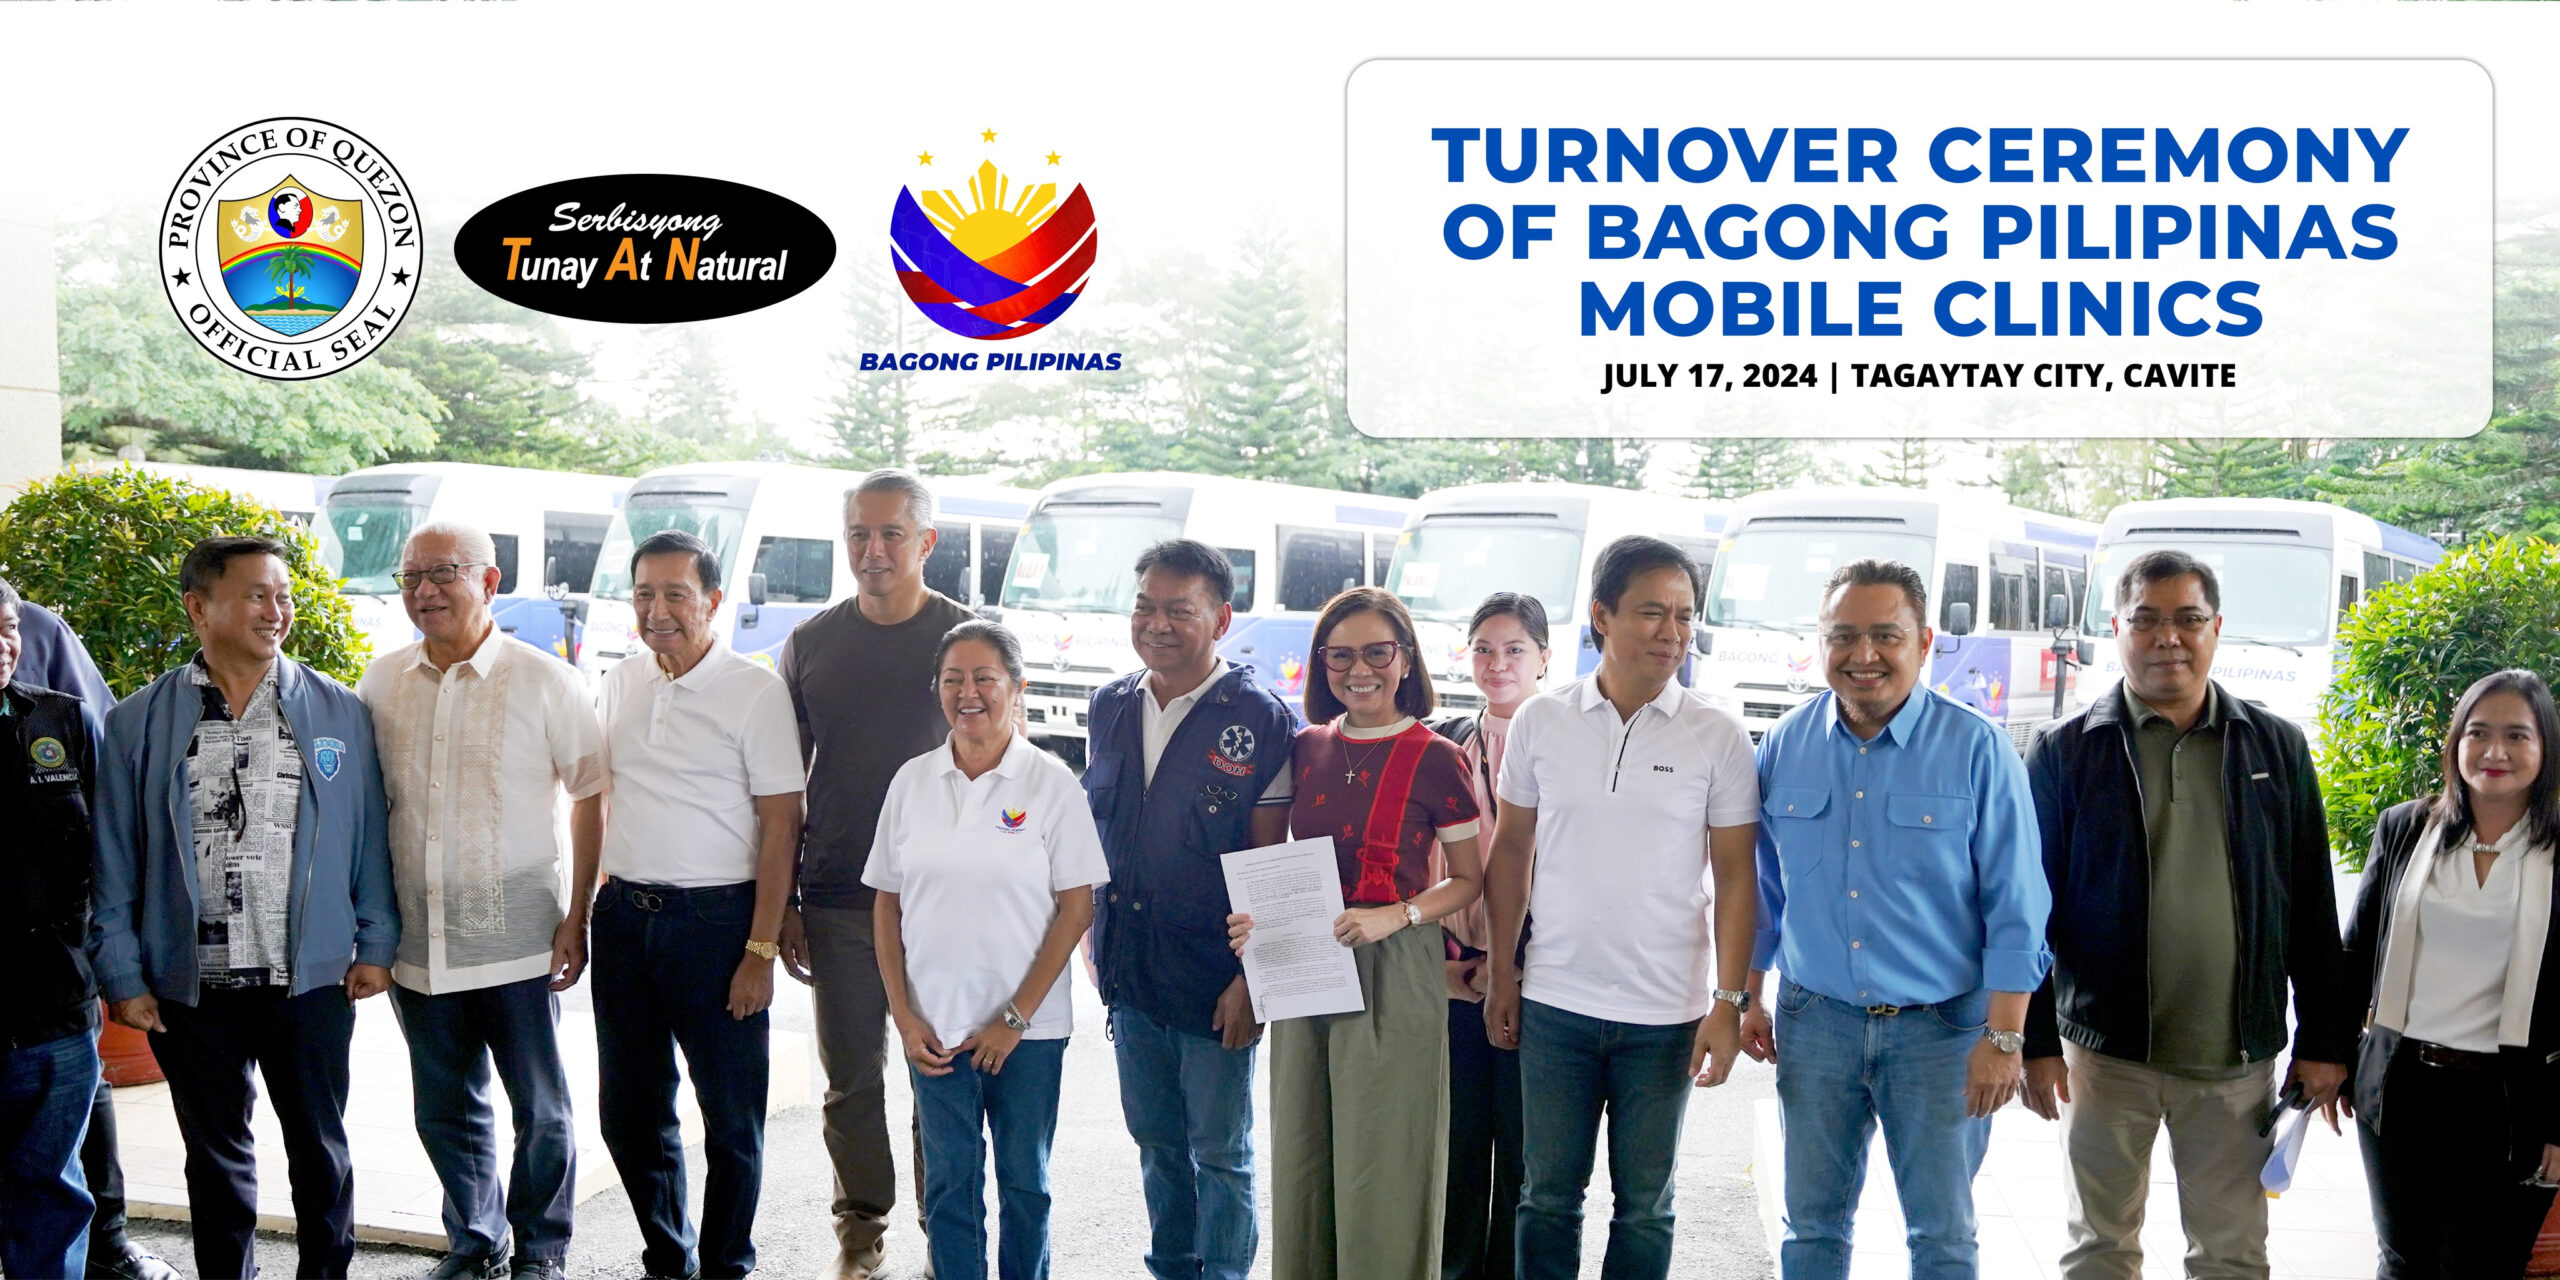 Turnover Ceremony of Bagong Pilipinas Mobiles Clinics | July 17, 2024